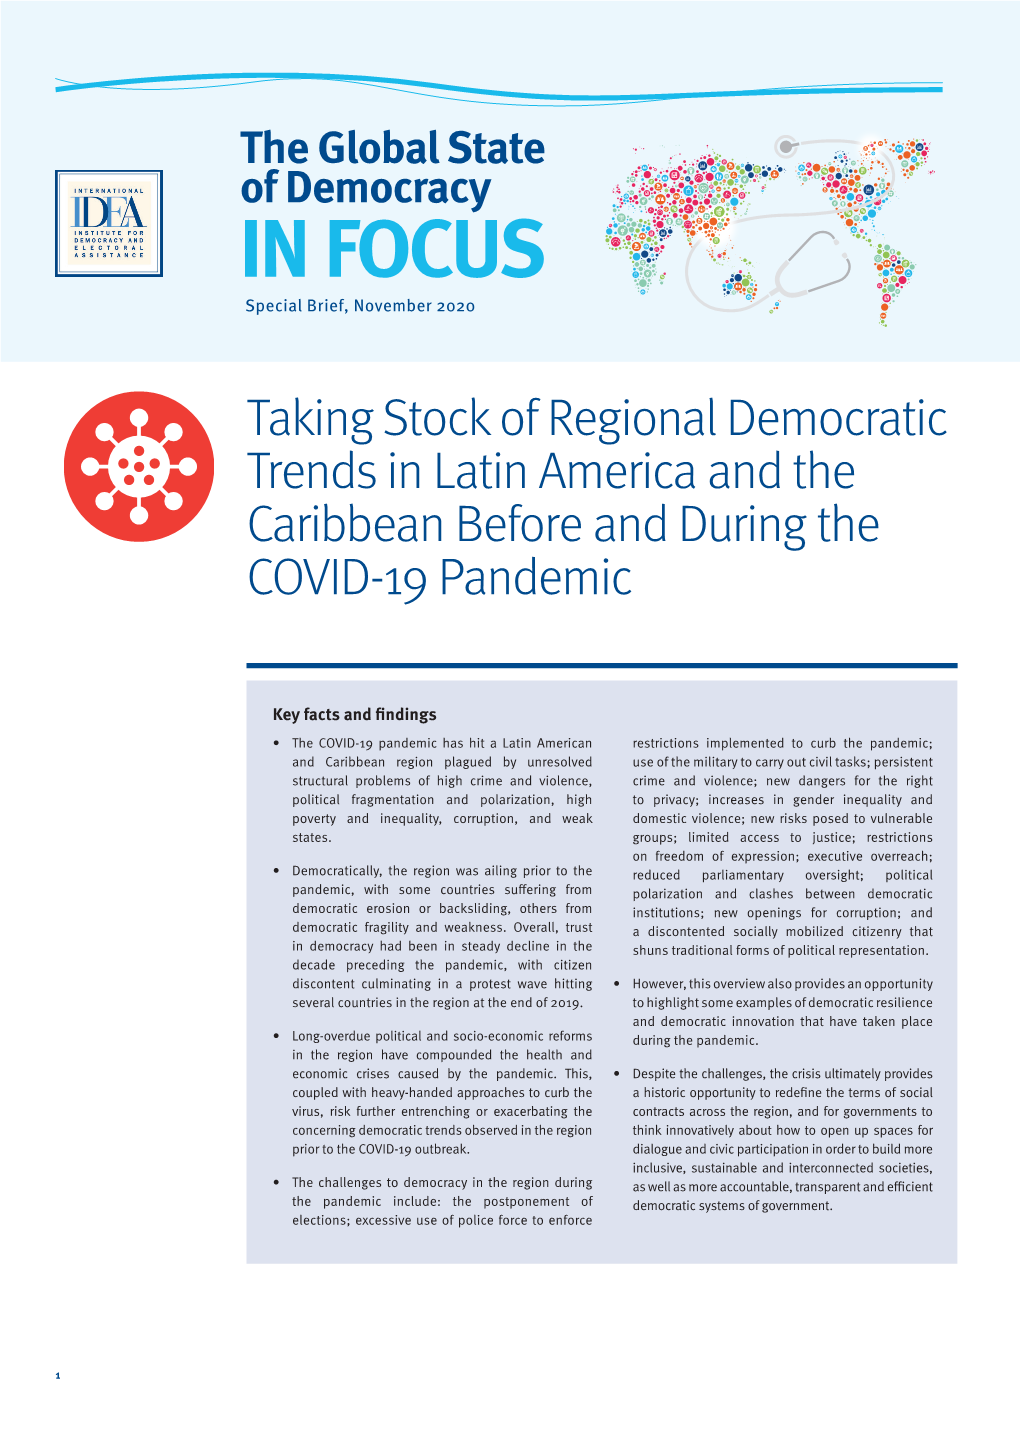 Taking Stock of Regional Democratic Trends in Latin America and The